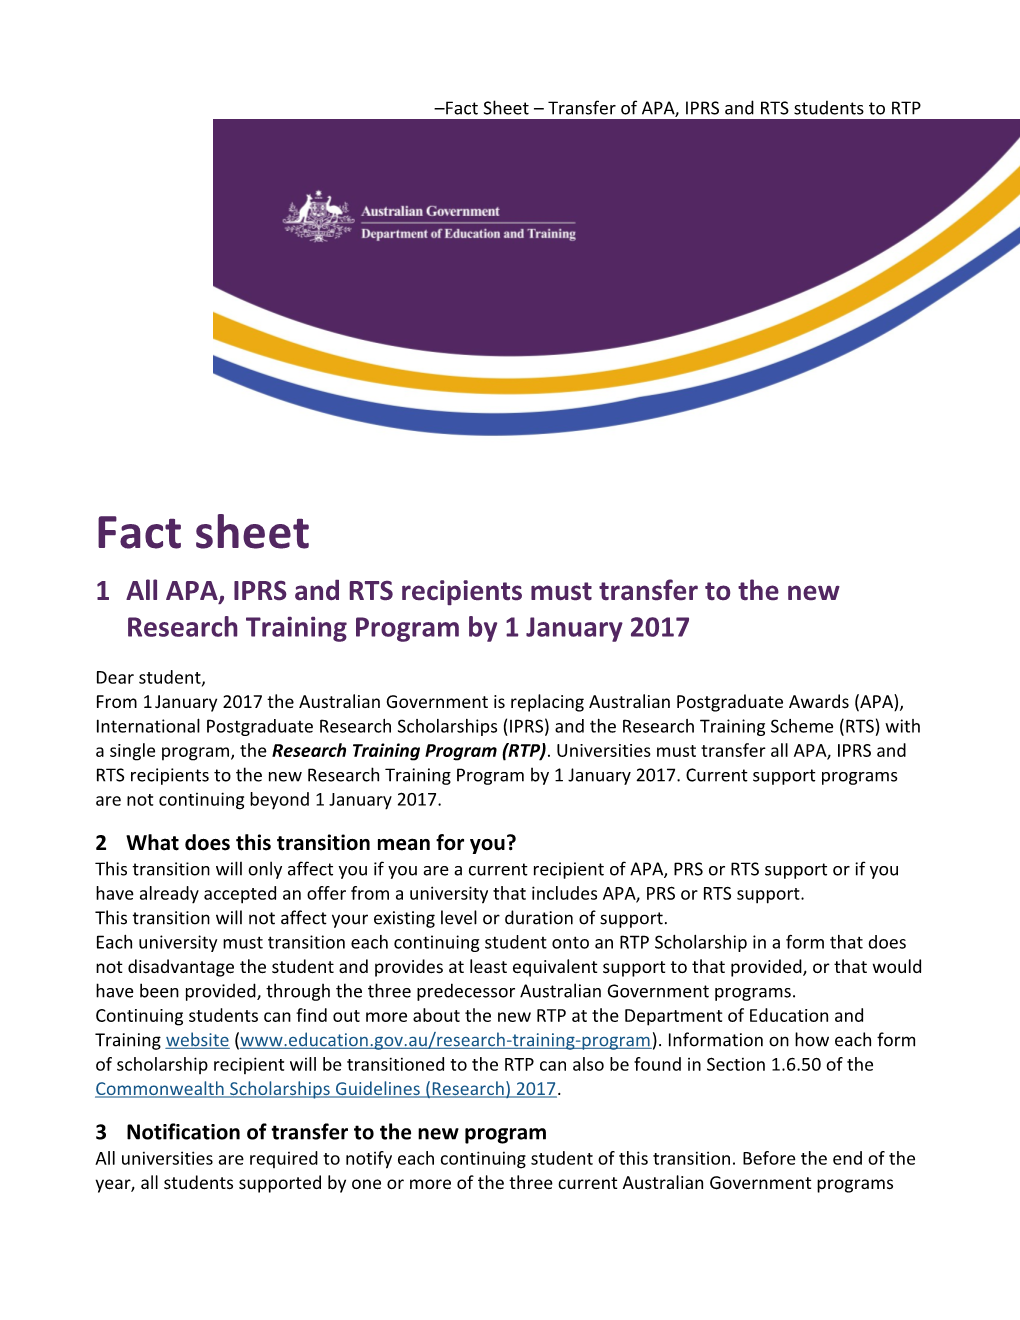 Fact Sheet Transfer of APA, IPRS and RTS Students to RTP